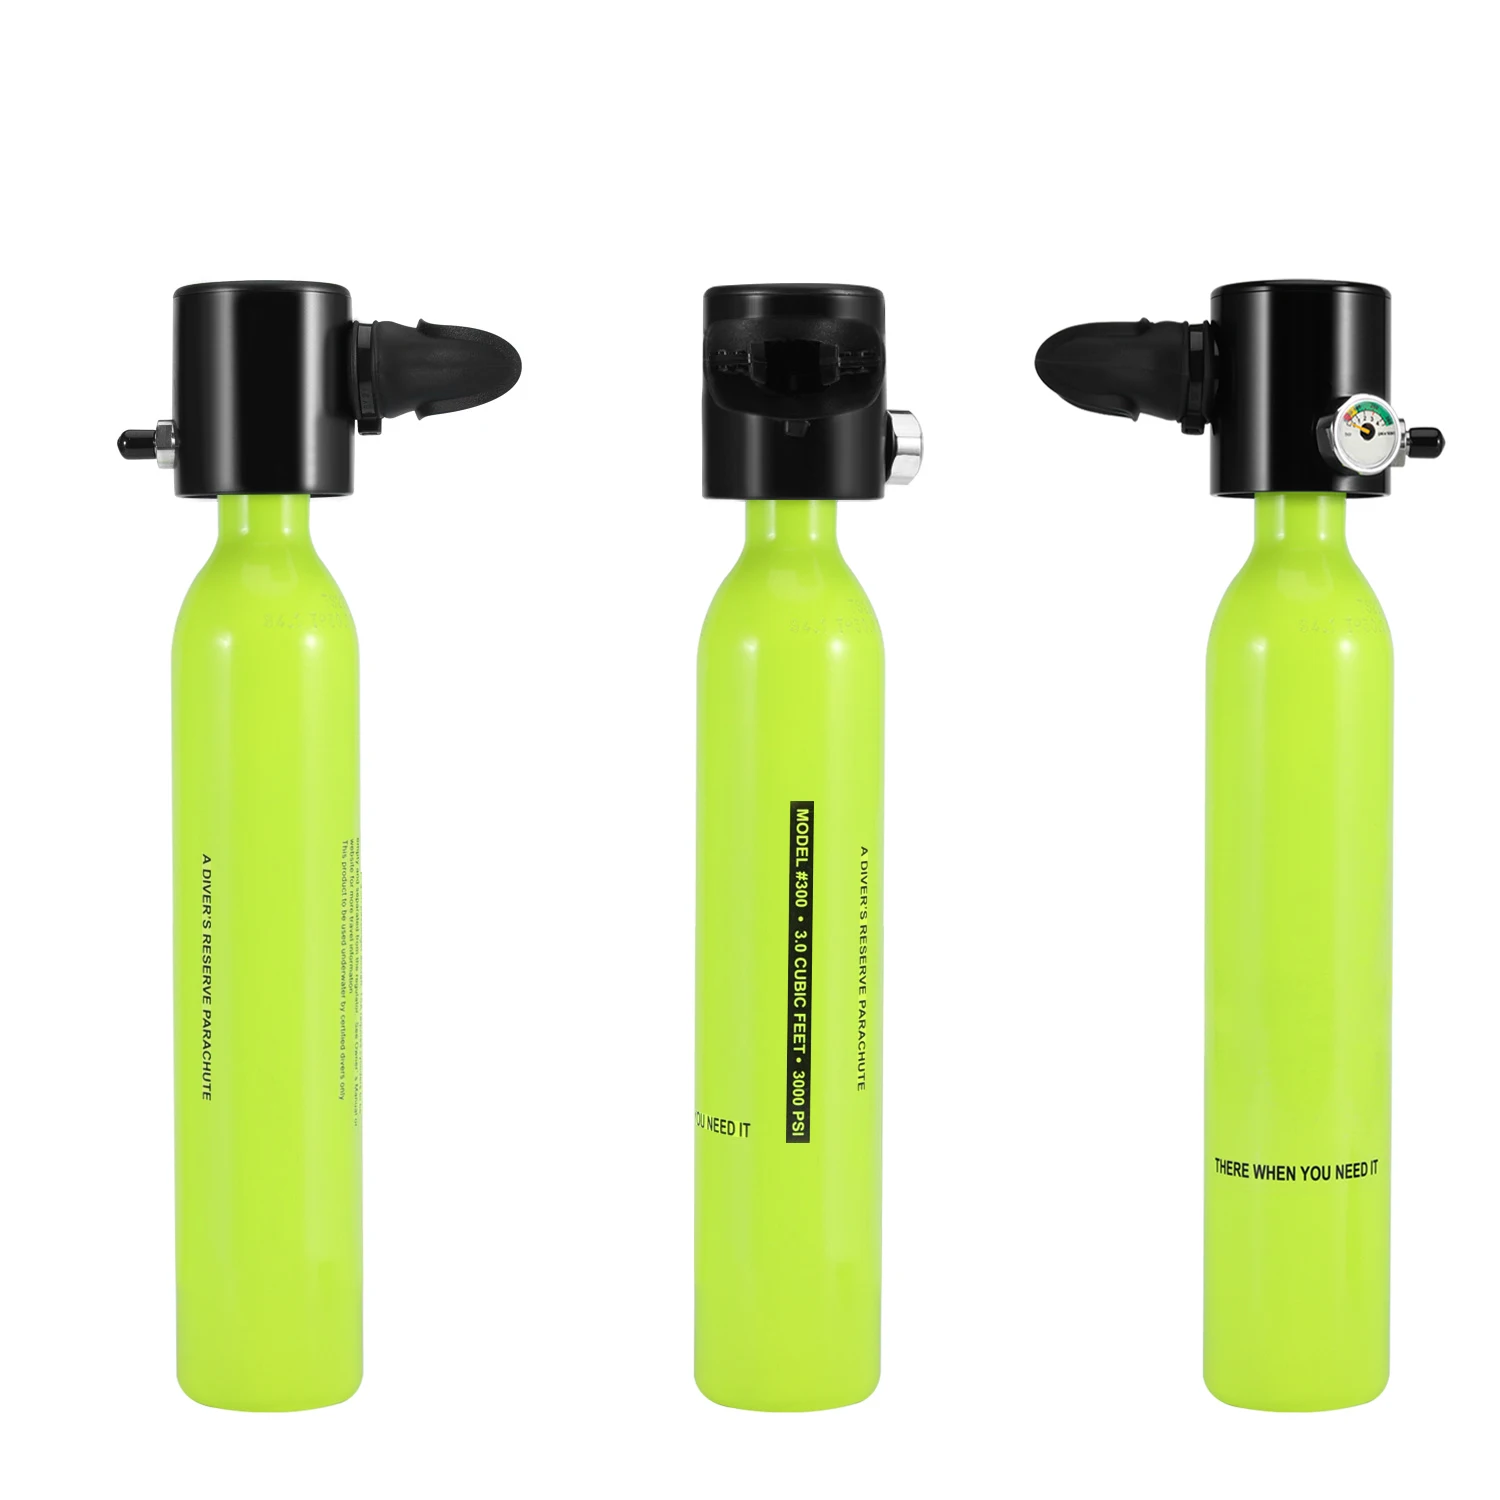 

Air tank total freedom breath underwater for 5 to 10 minutes TUV CE Mini scuba diving equipment, Yellow